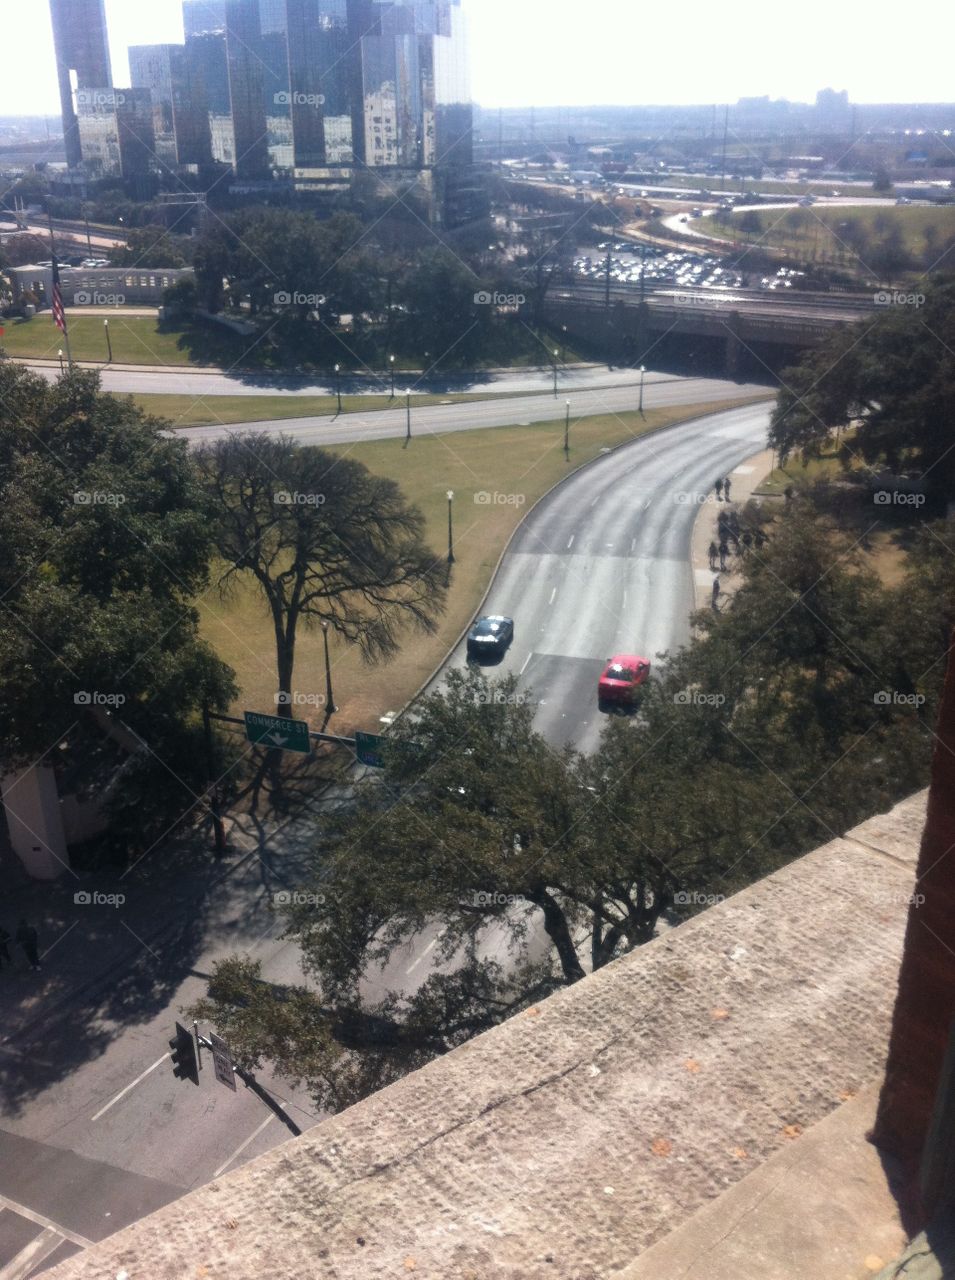 Dealey Plaza in Dallas, Texas from the Texas School Book Depository. This photo shows how tall the trees grew since the day JFK was shot and the precision needed to hit such a precise target from a far distance. 